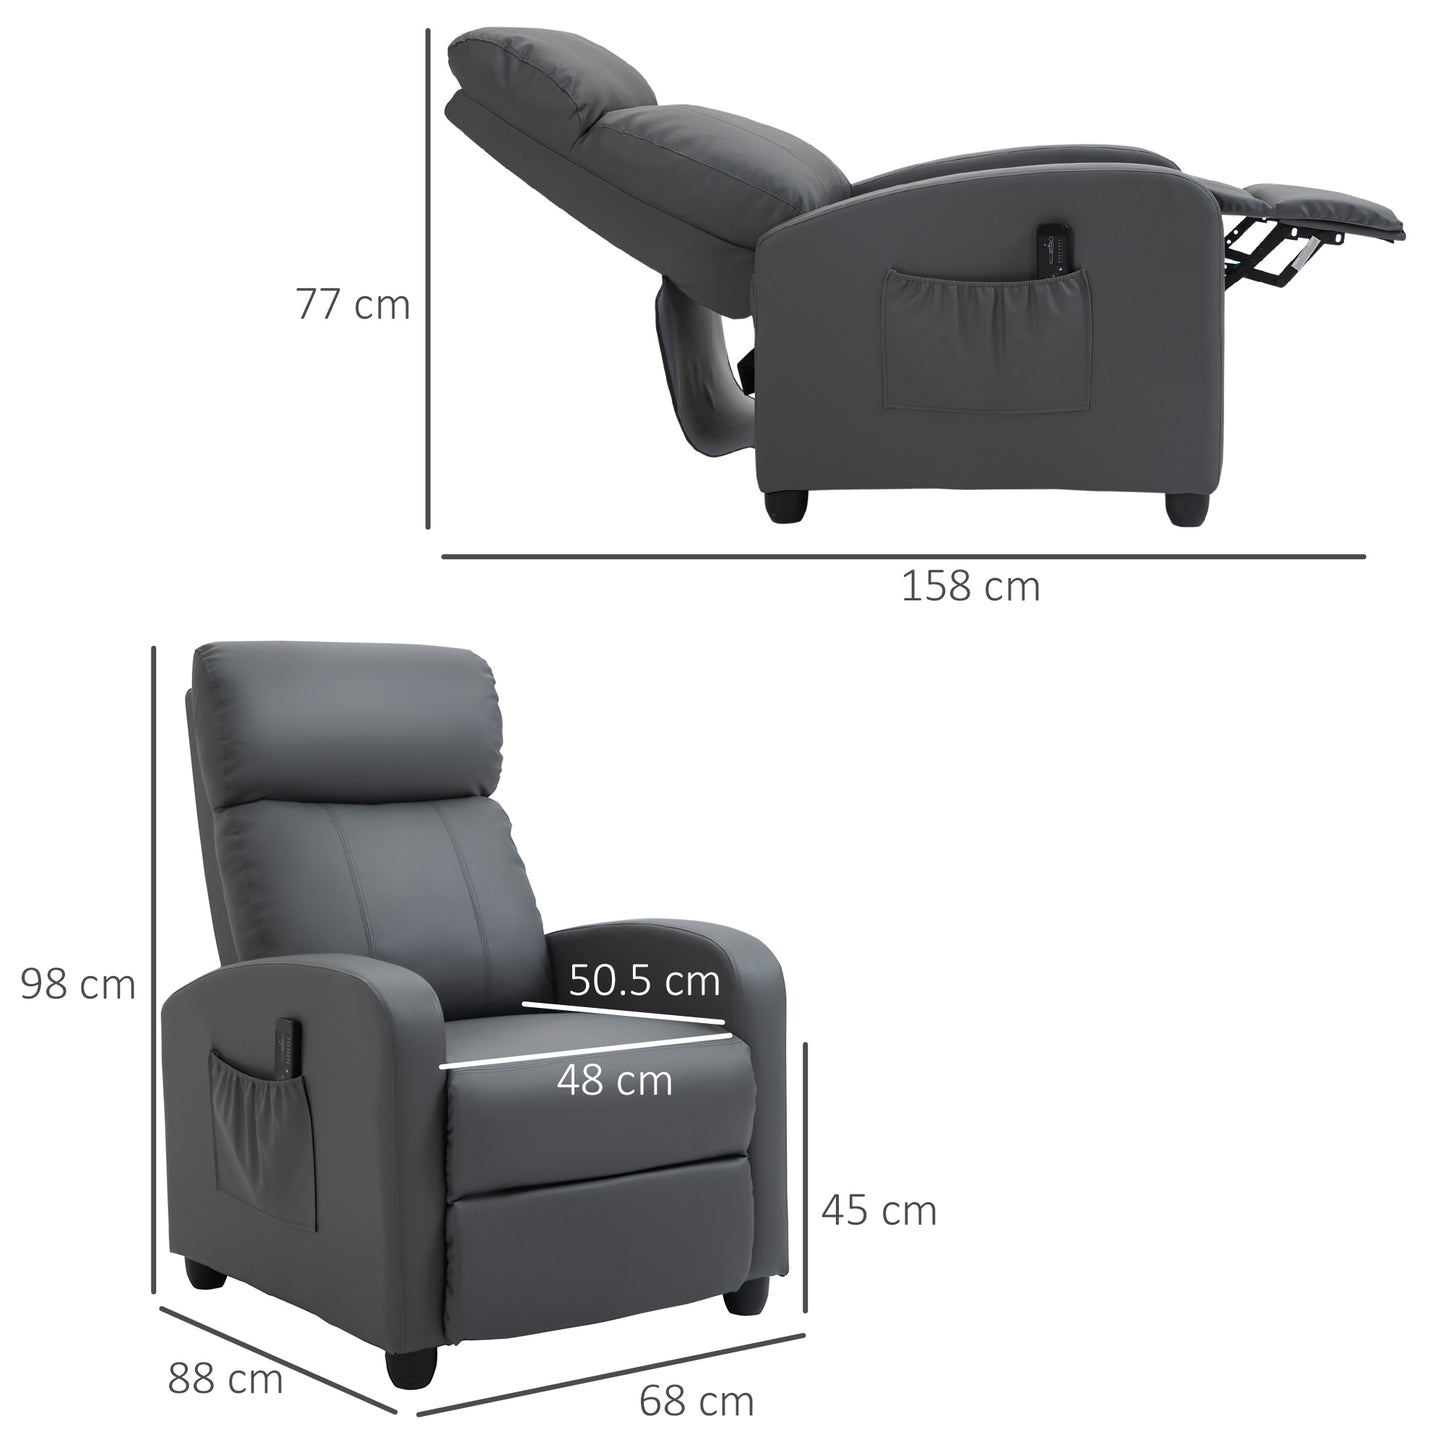 HOMCOM Reclining Massage Chair, Faux Leather with Footrest, Remote Control, for Lounge, Bedroom, Cinema, Grey